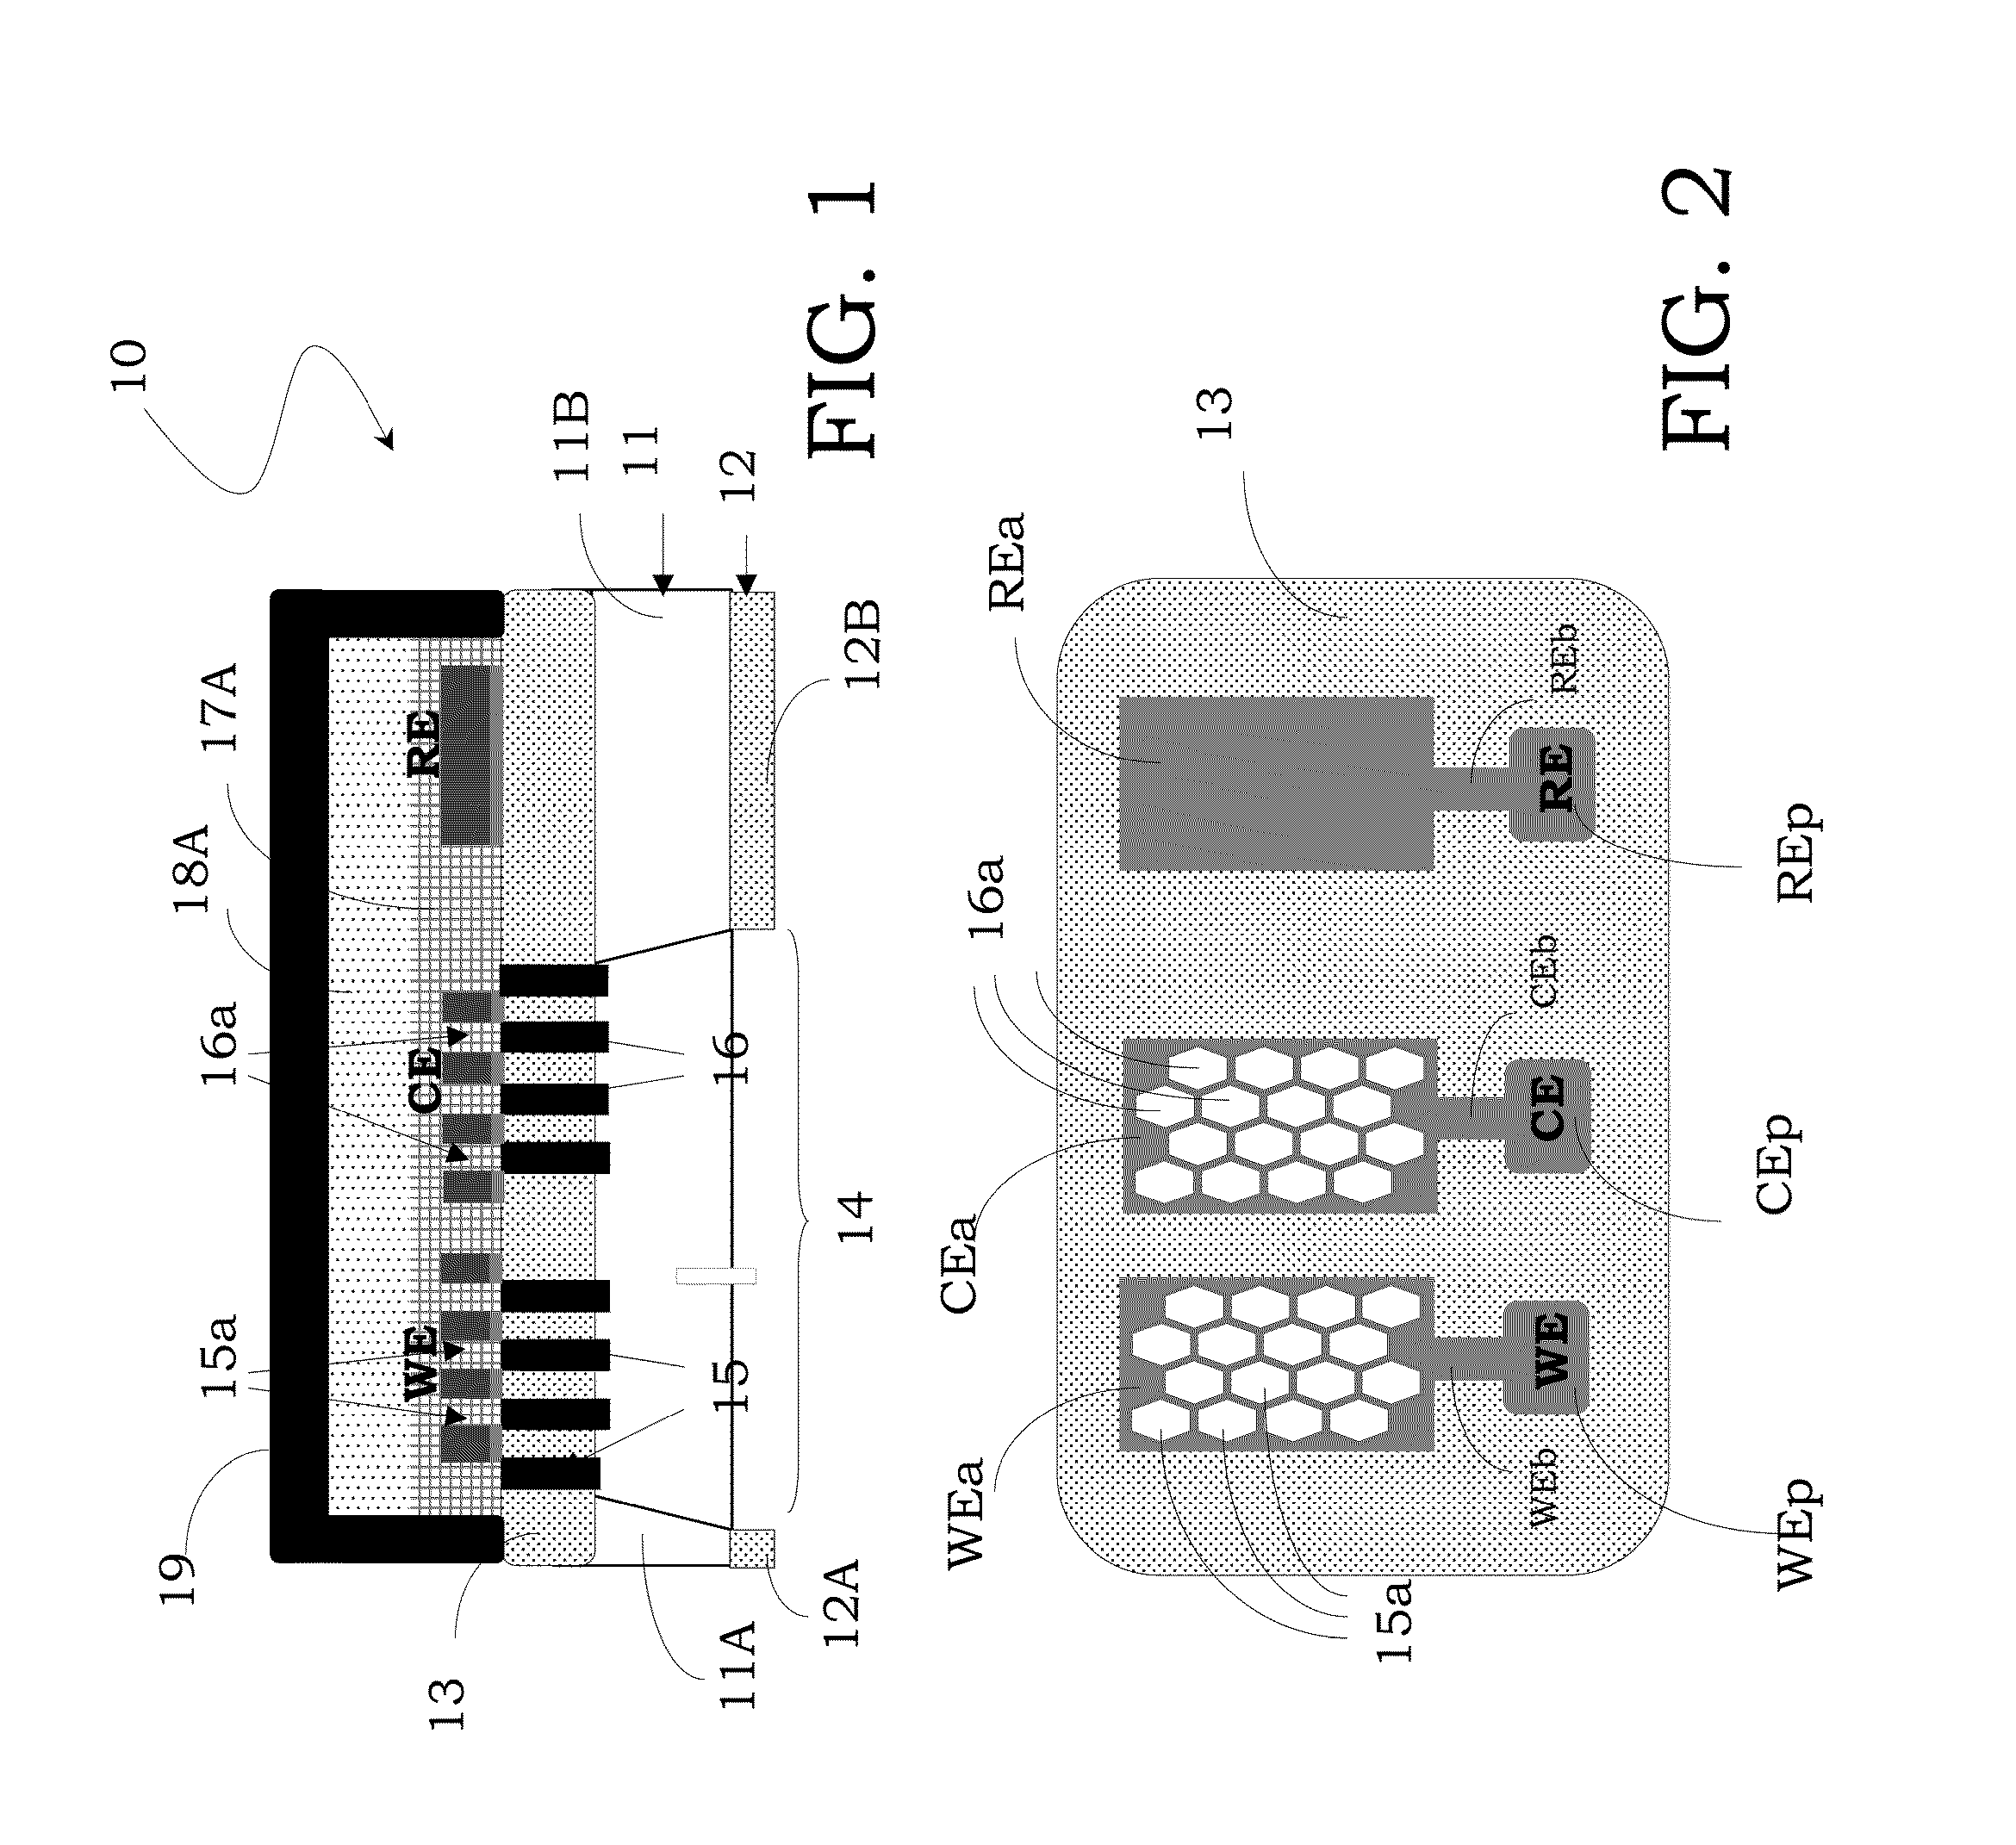 Integrated gas sensor device, in particular for detecting carbon monoxide (CO)